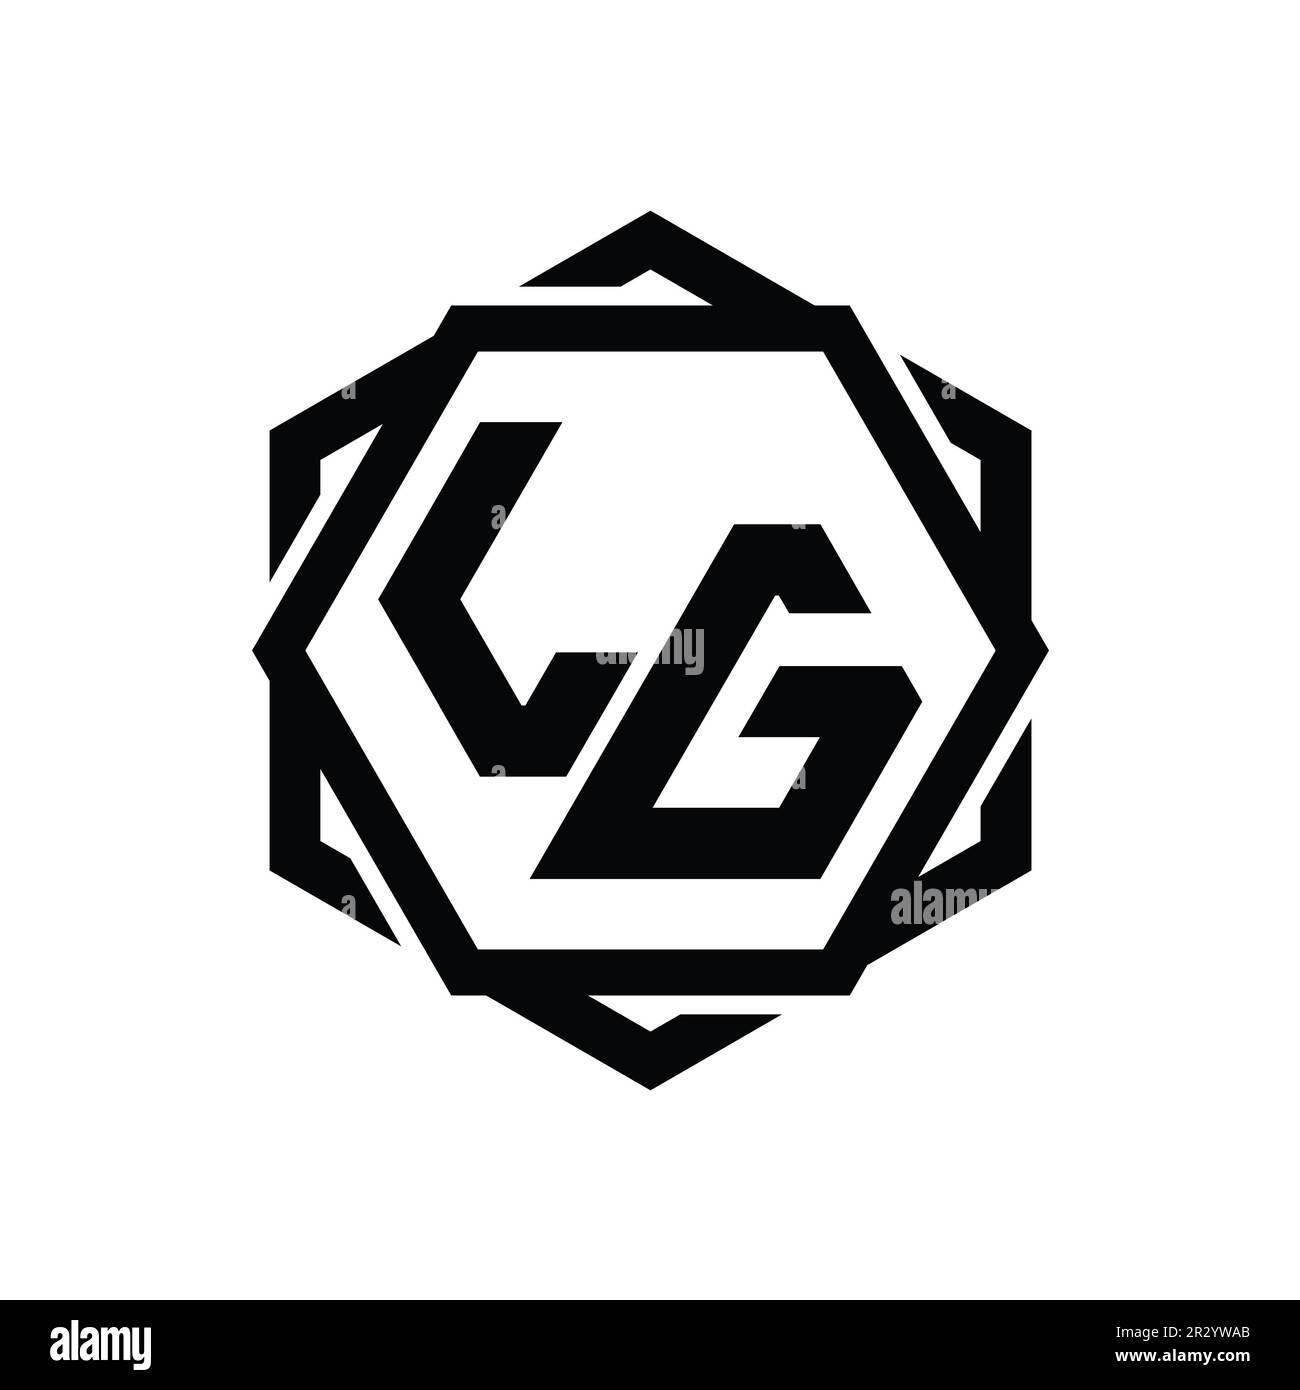 LG Logo monogram hexagon shape with geometric abstract isolated outline design template Stock Photo